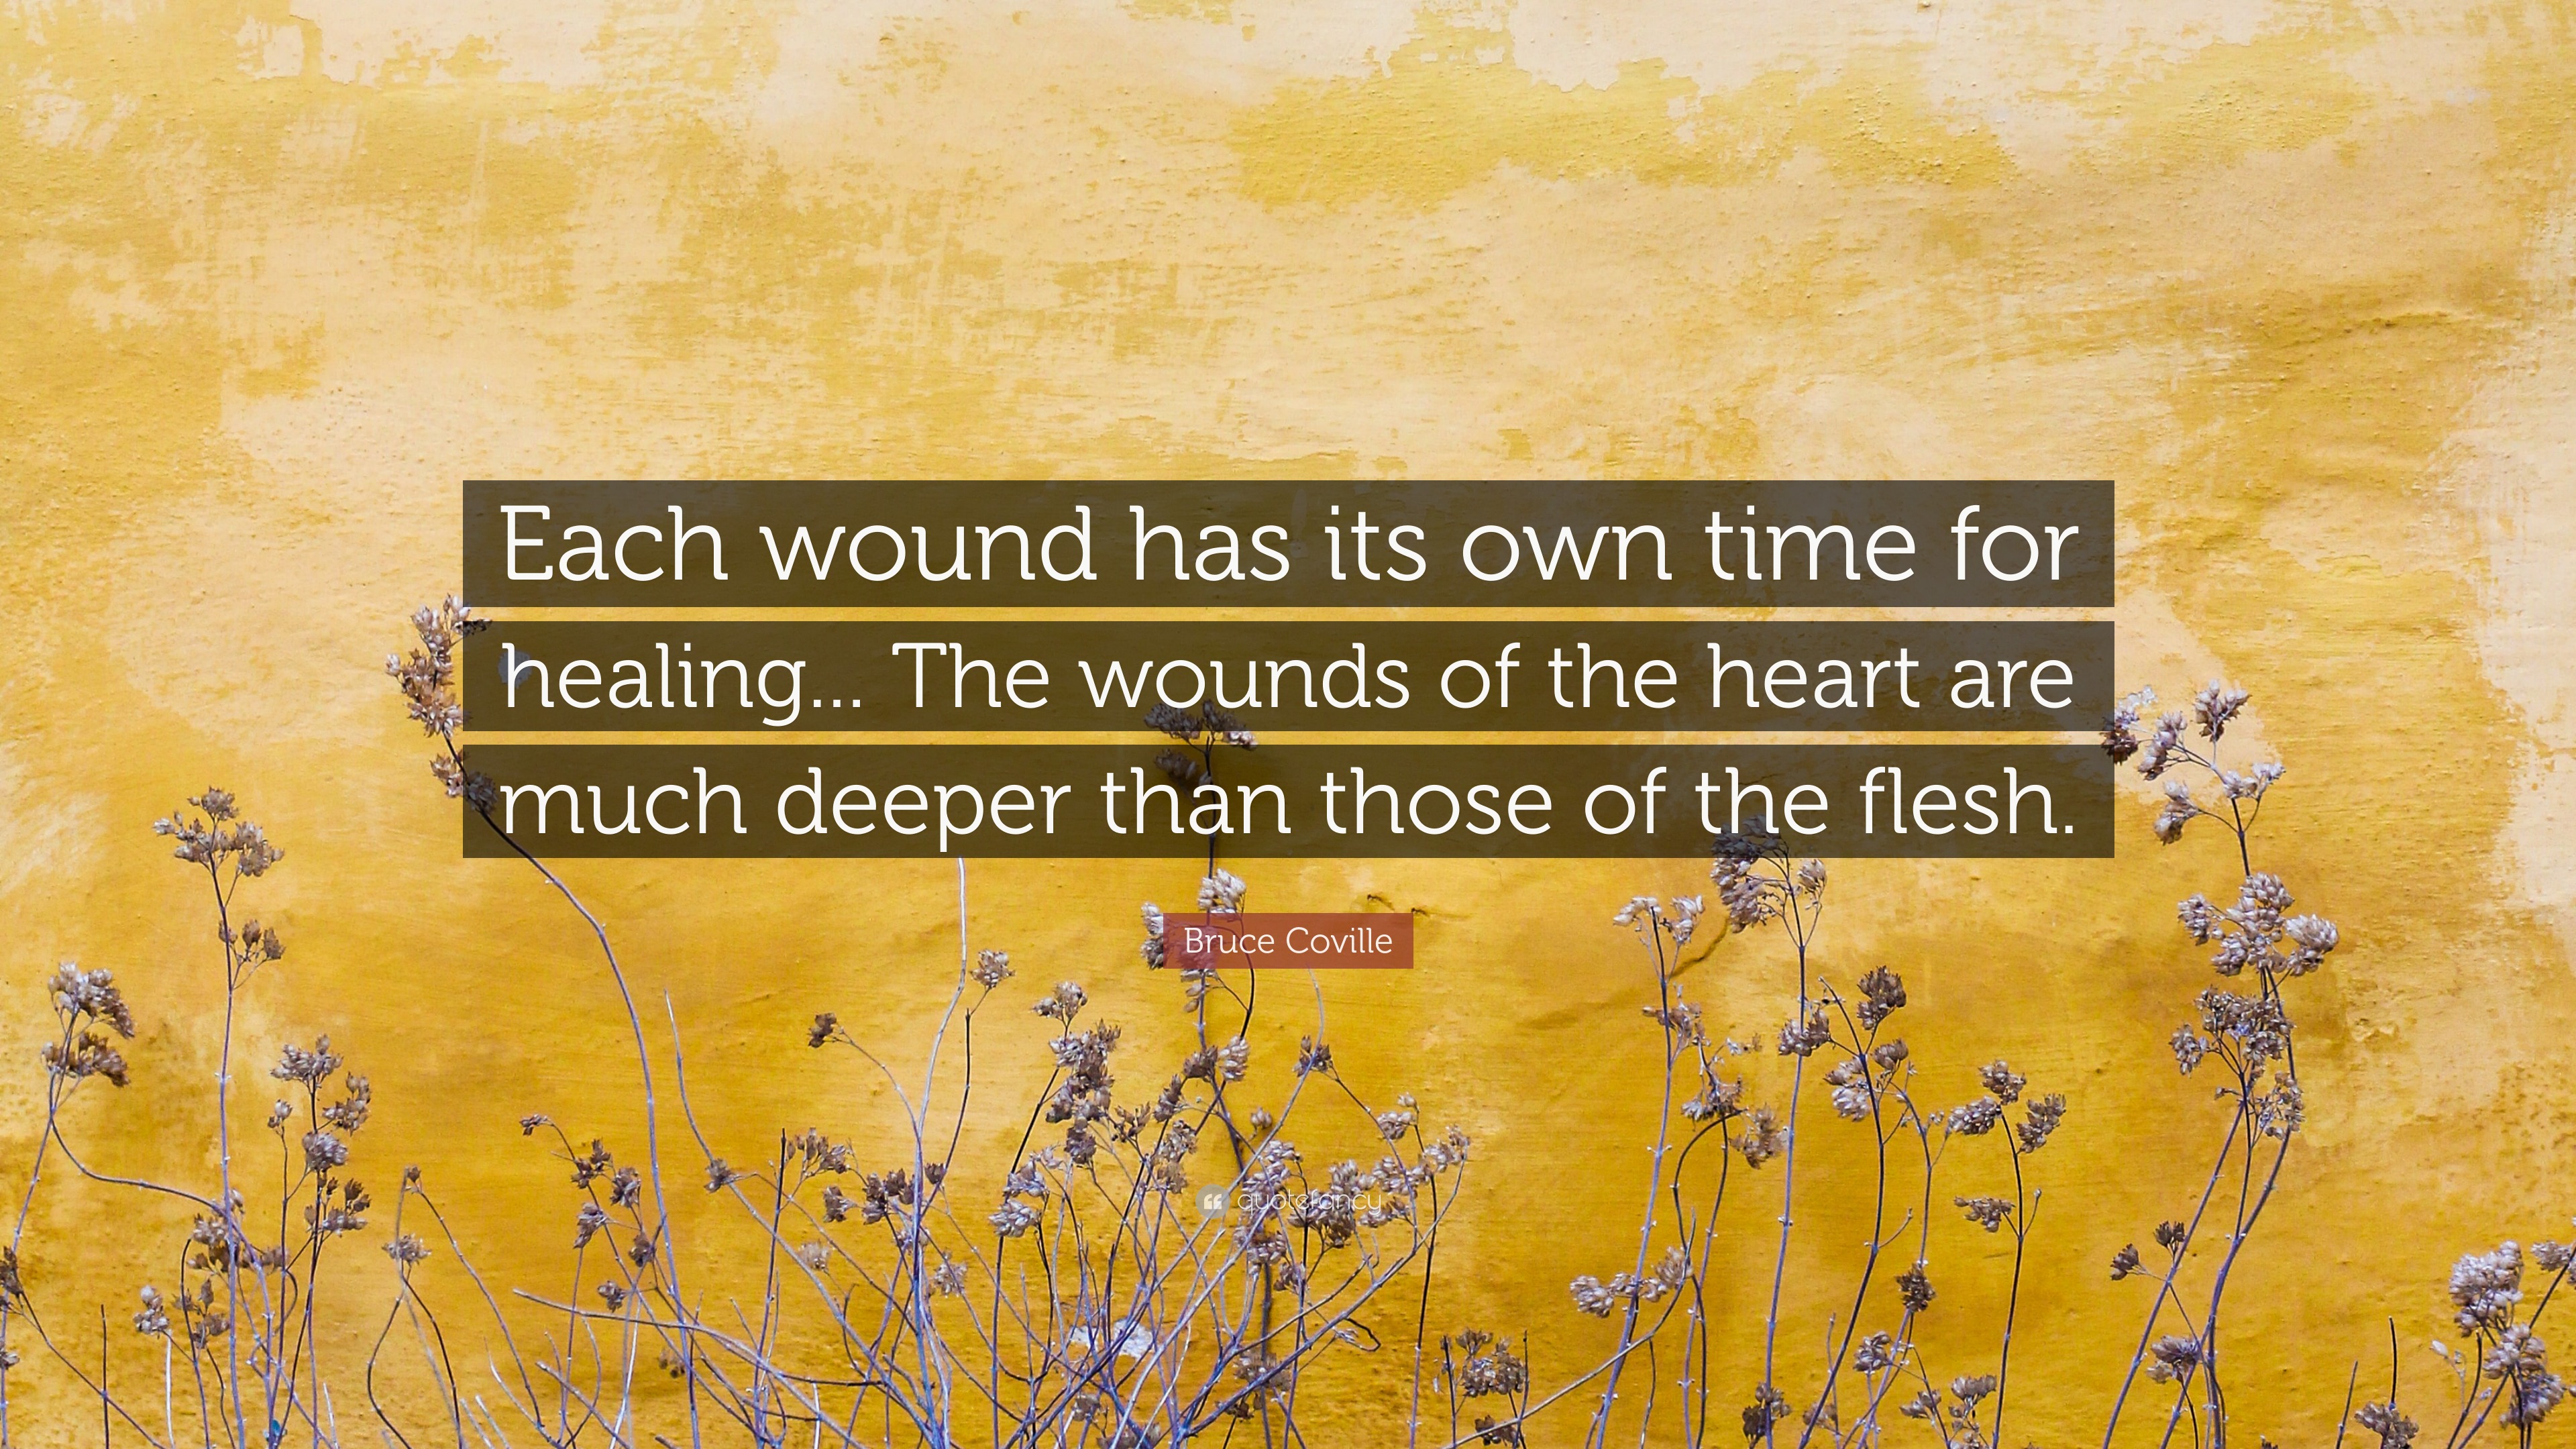 Bruce Coville Quote: “Each wound has its own time for healing